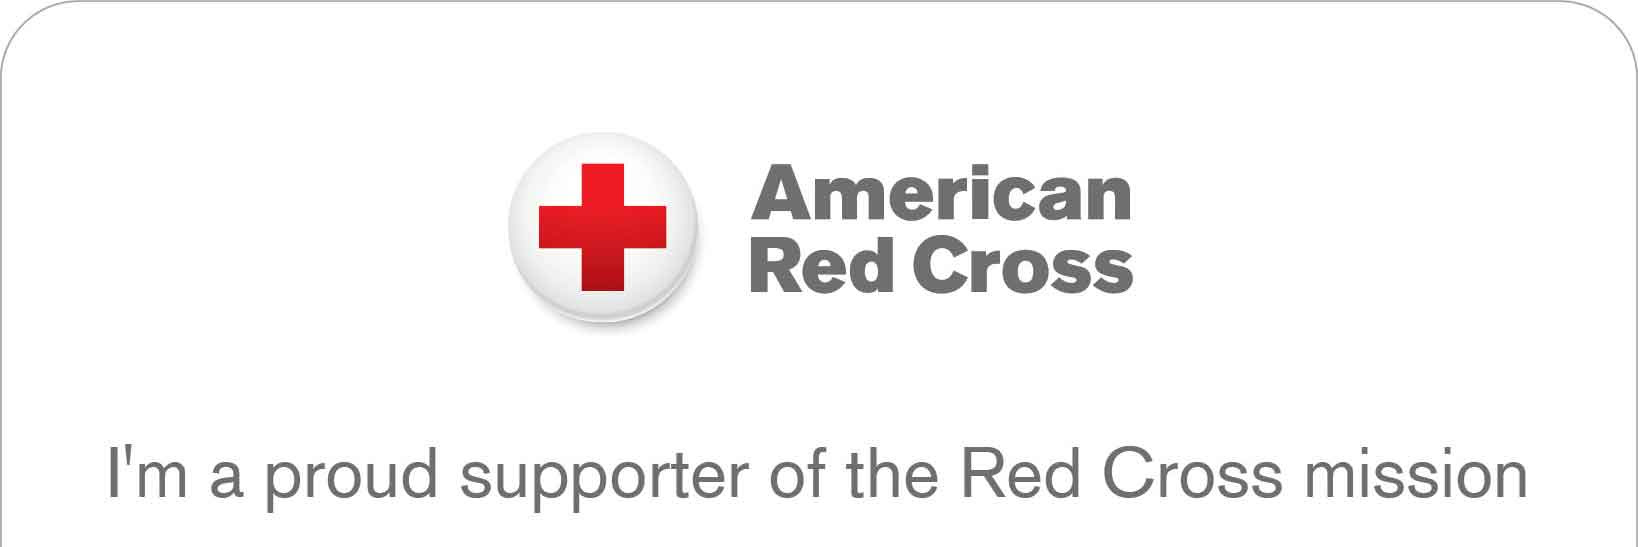 American Red Cross 2019 Supporter Card